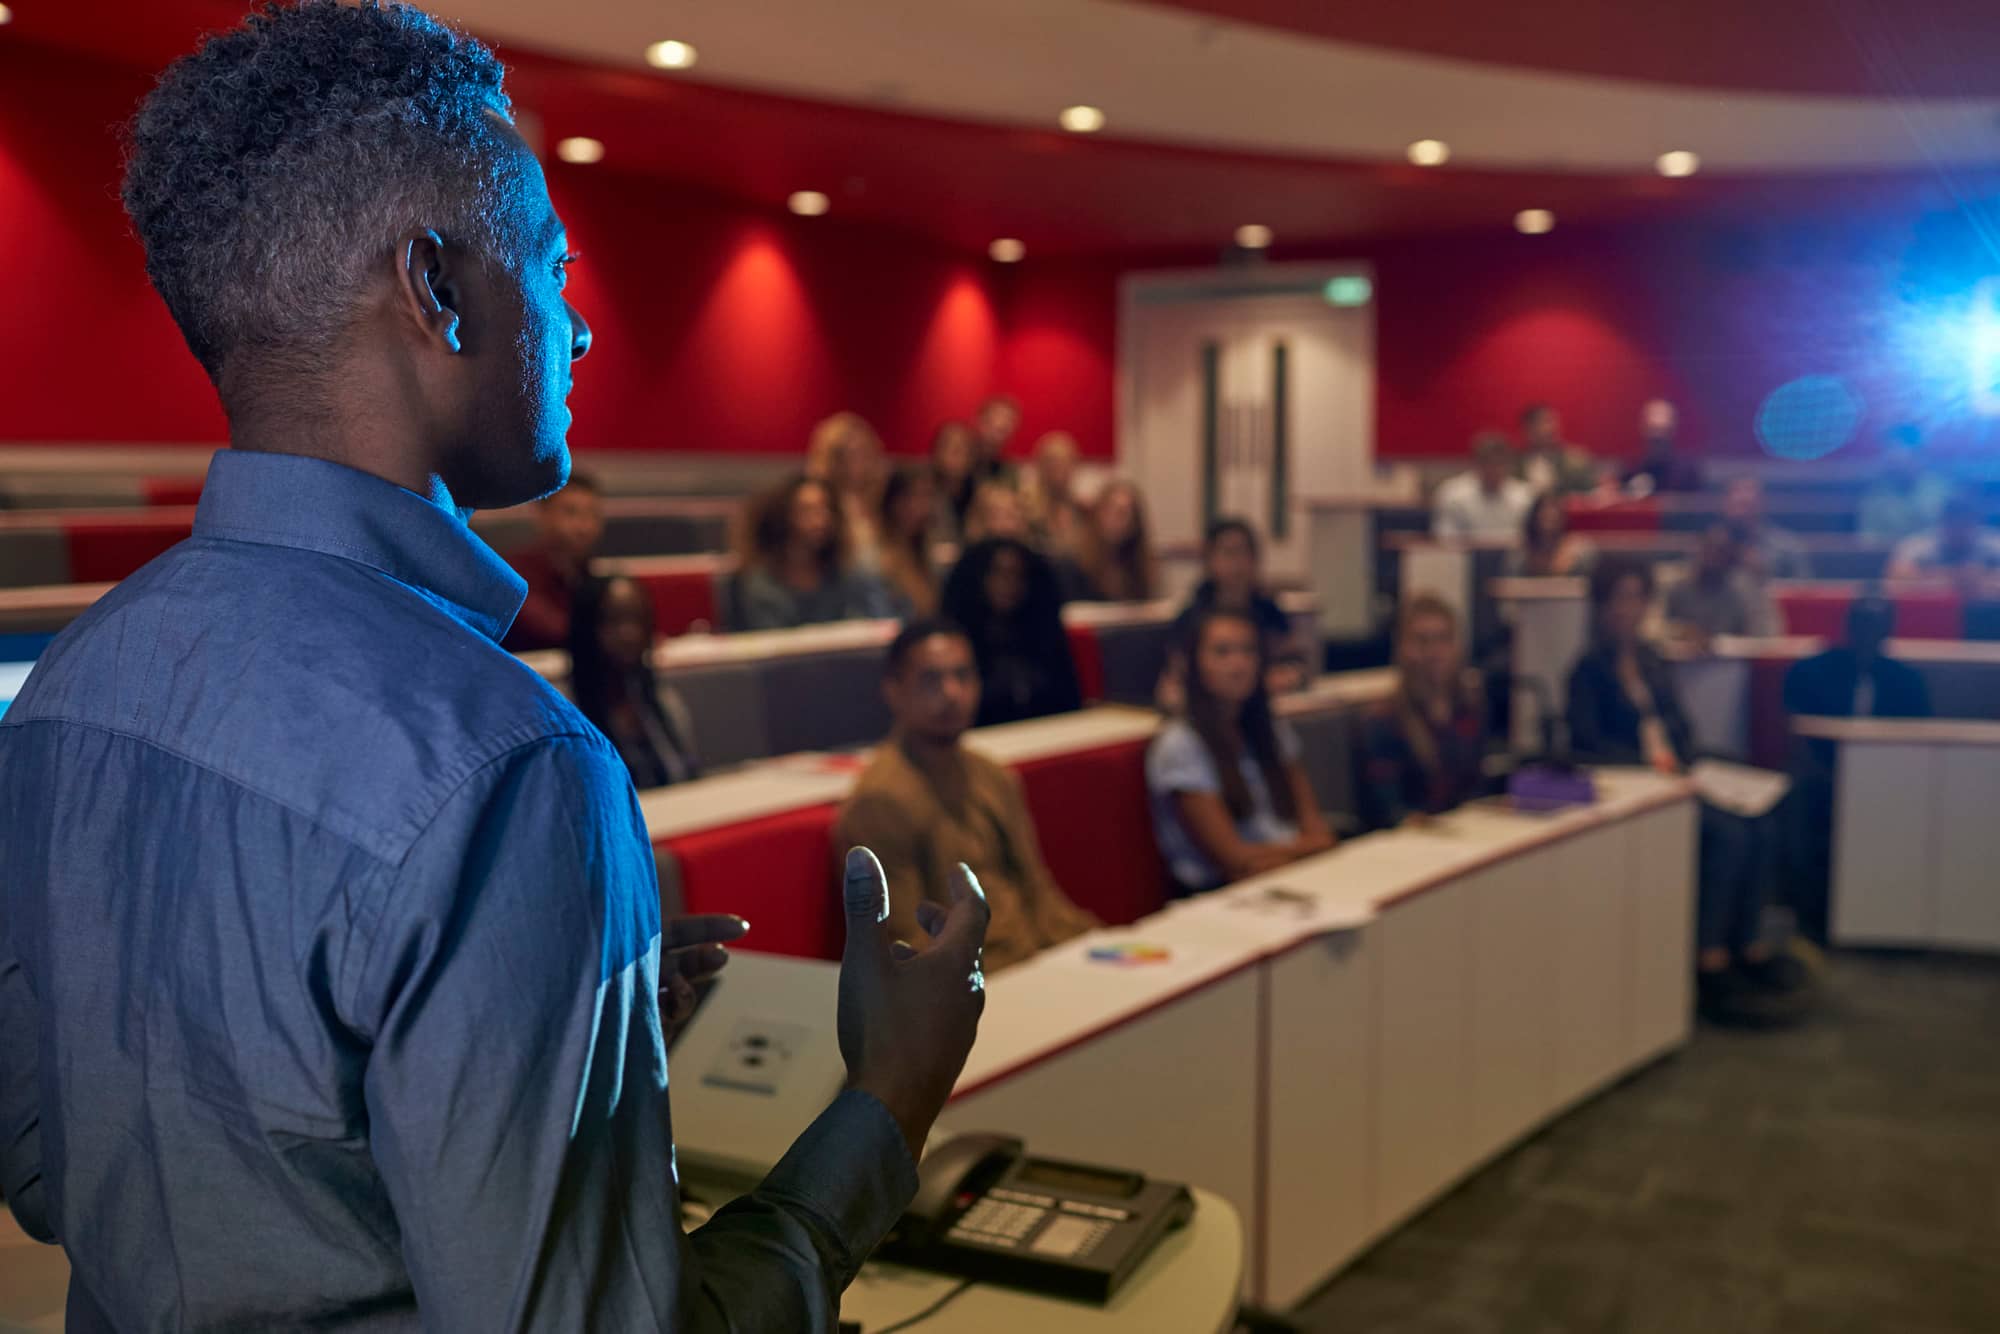 A male of darker complexion is presenting to a multi-level conference room full of audience members.